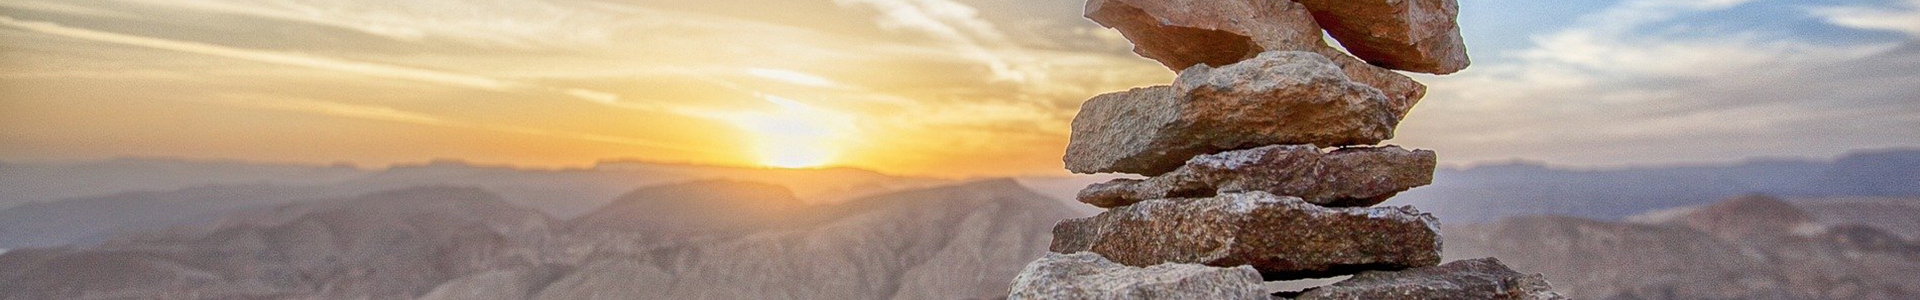 The Great Balancing Act banner: Rocks stacked on top of each other with a sunset in the background